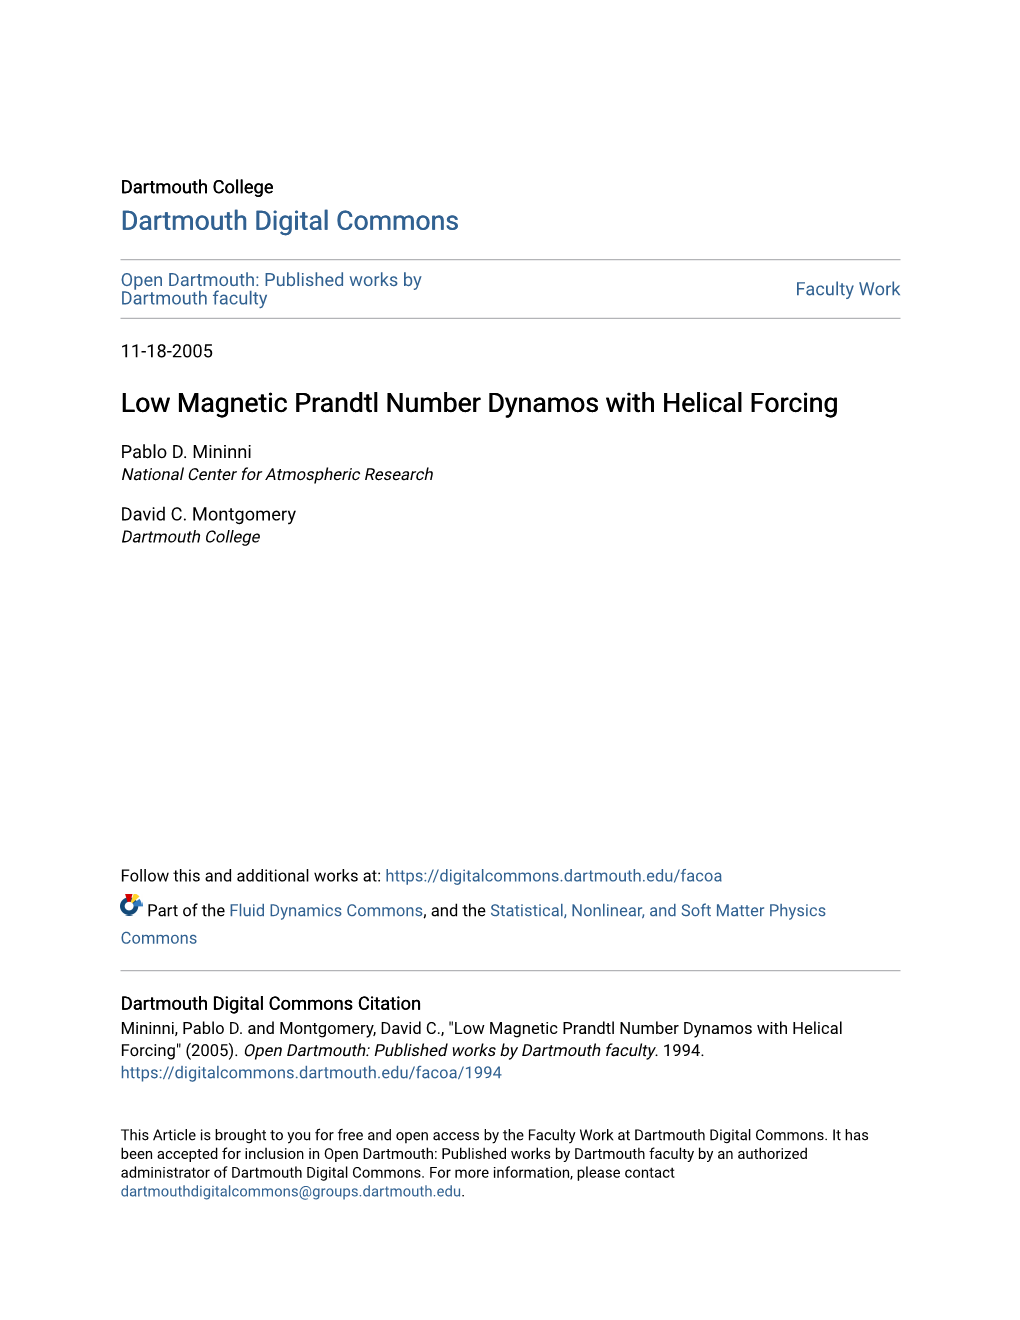 Low Magnetic Prandtl Number Dynamos with Helical Forcing